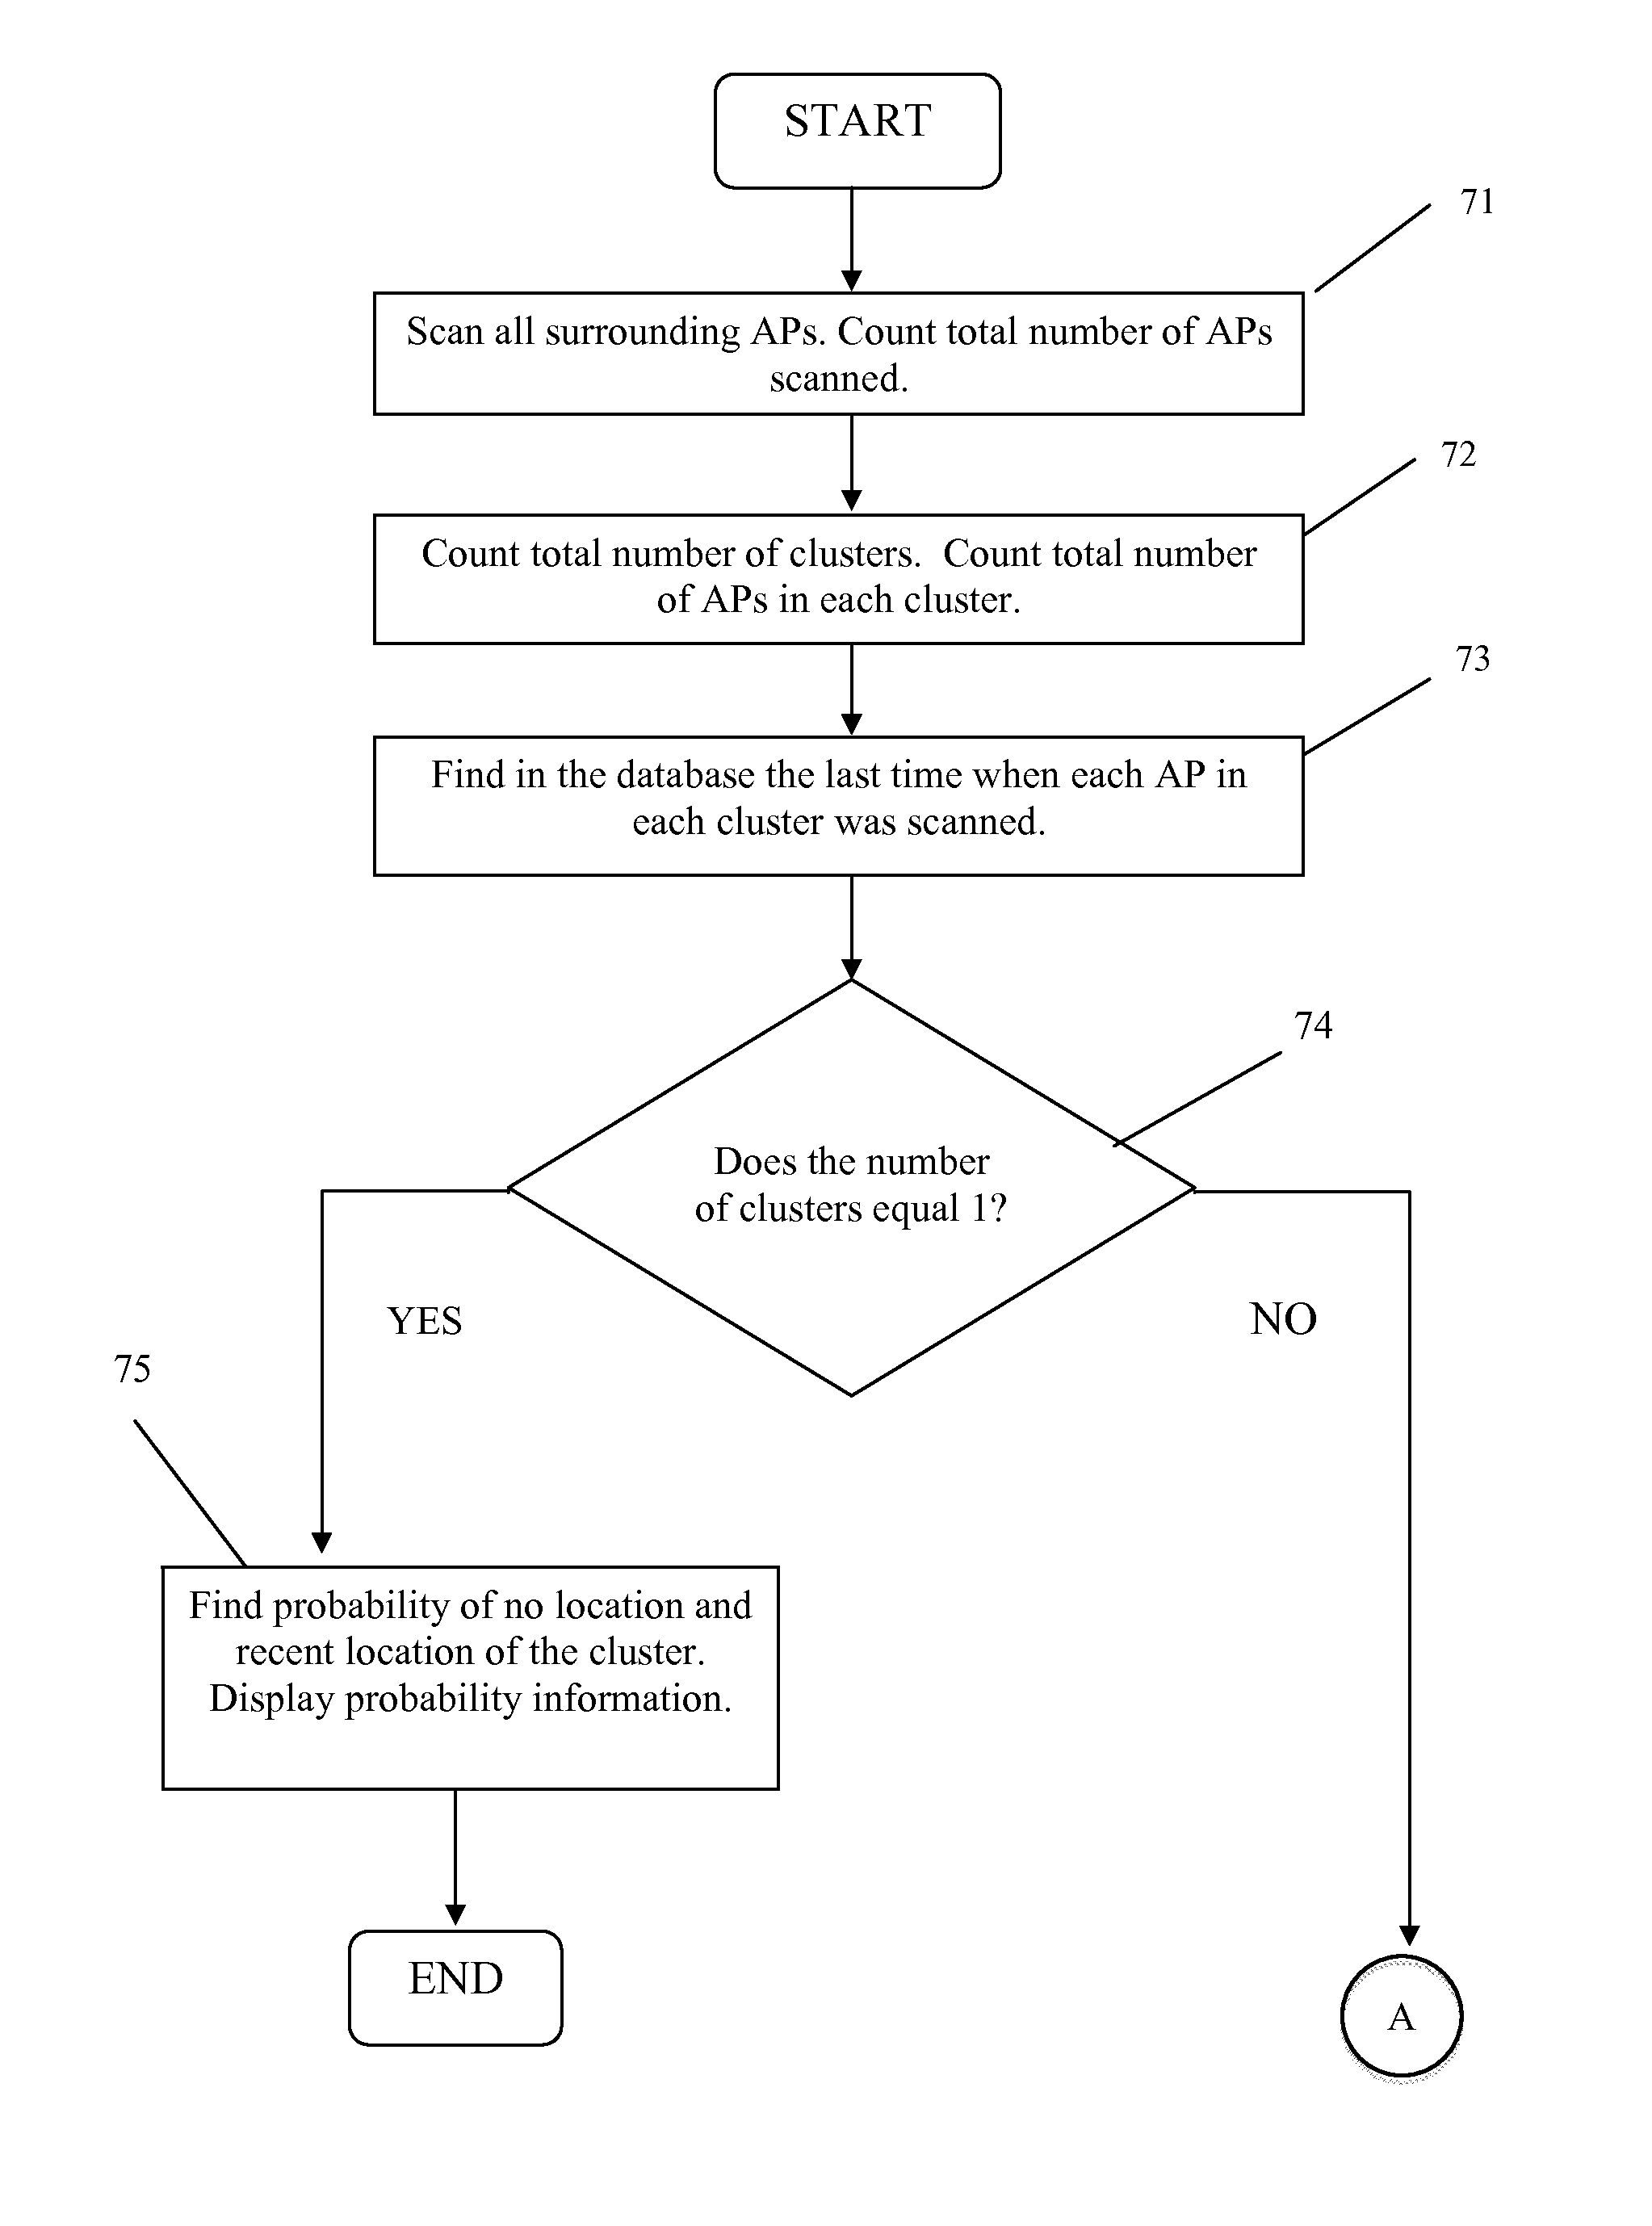 System and method for estimating the probability of movement of access points in a WLAN-based positioning system